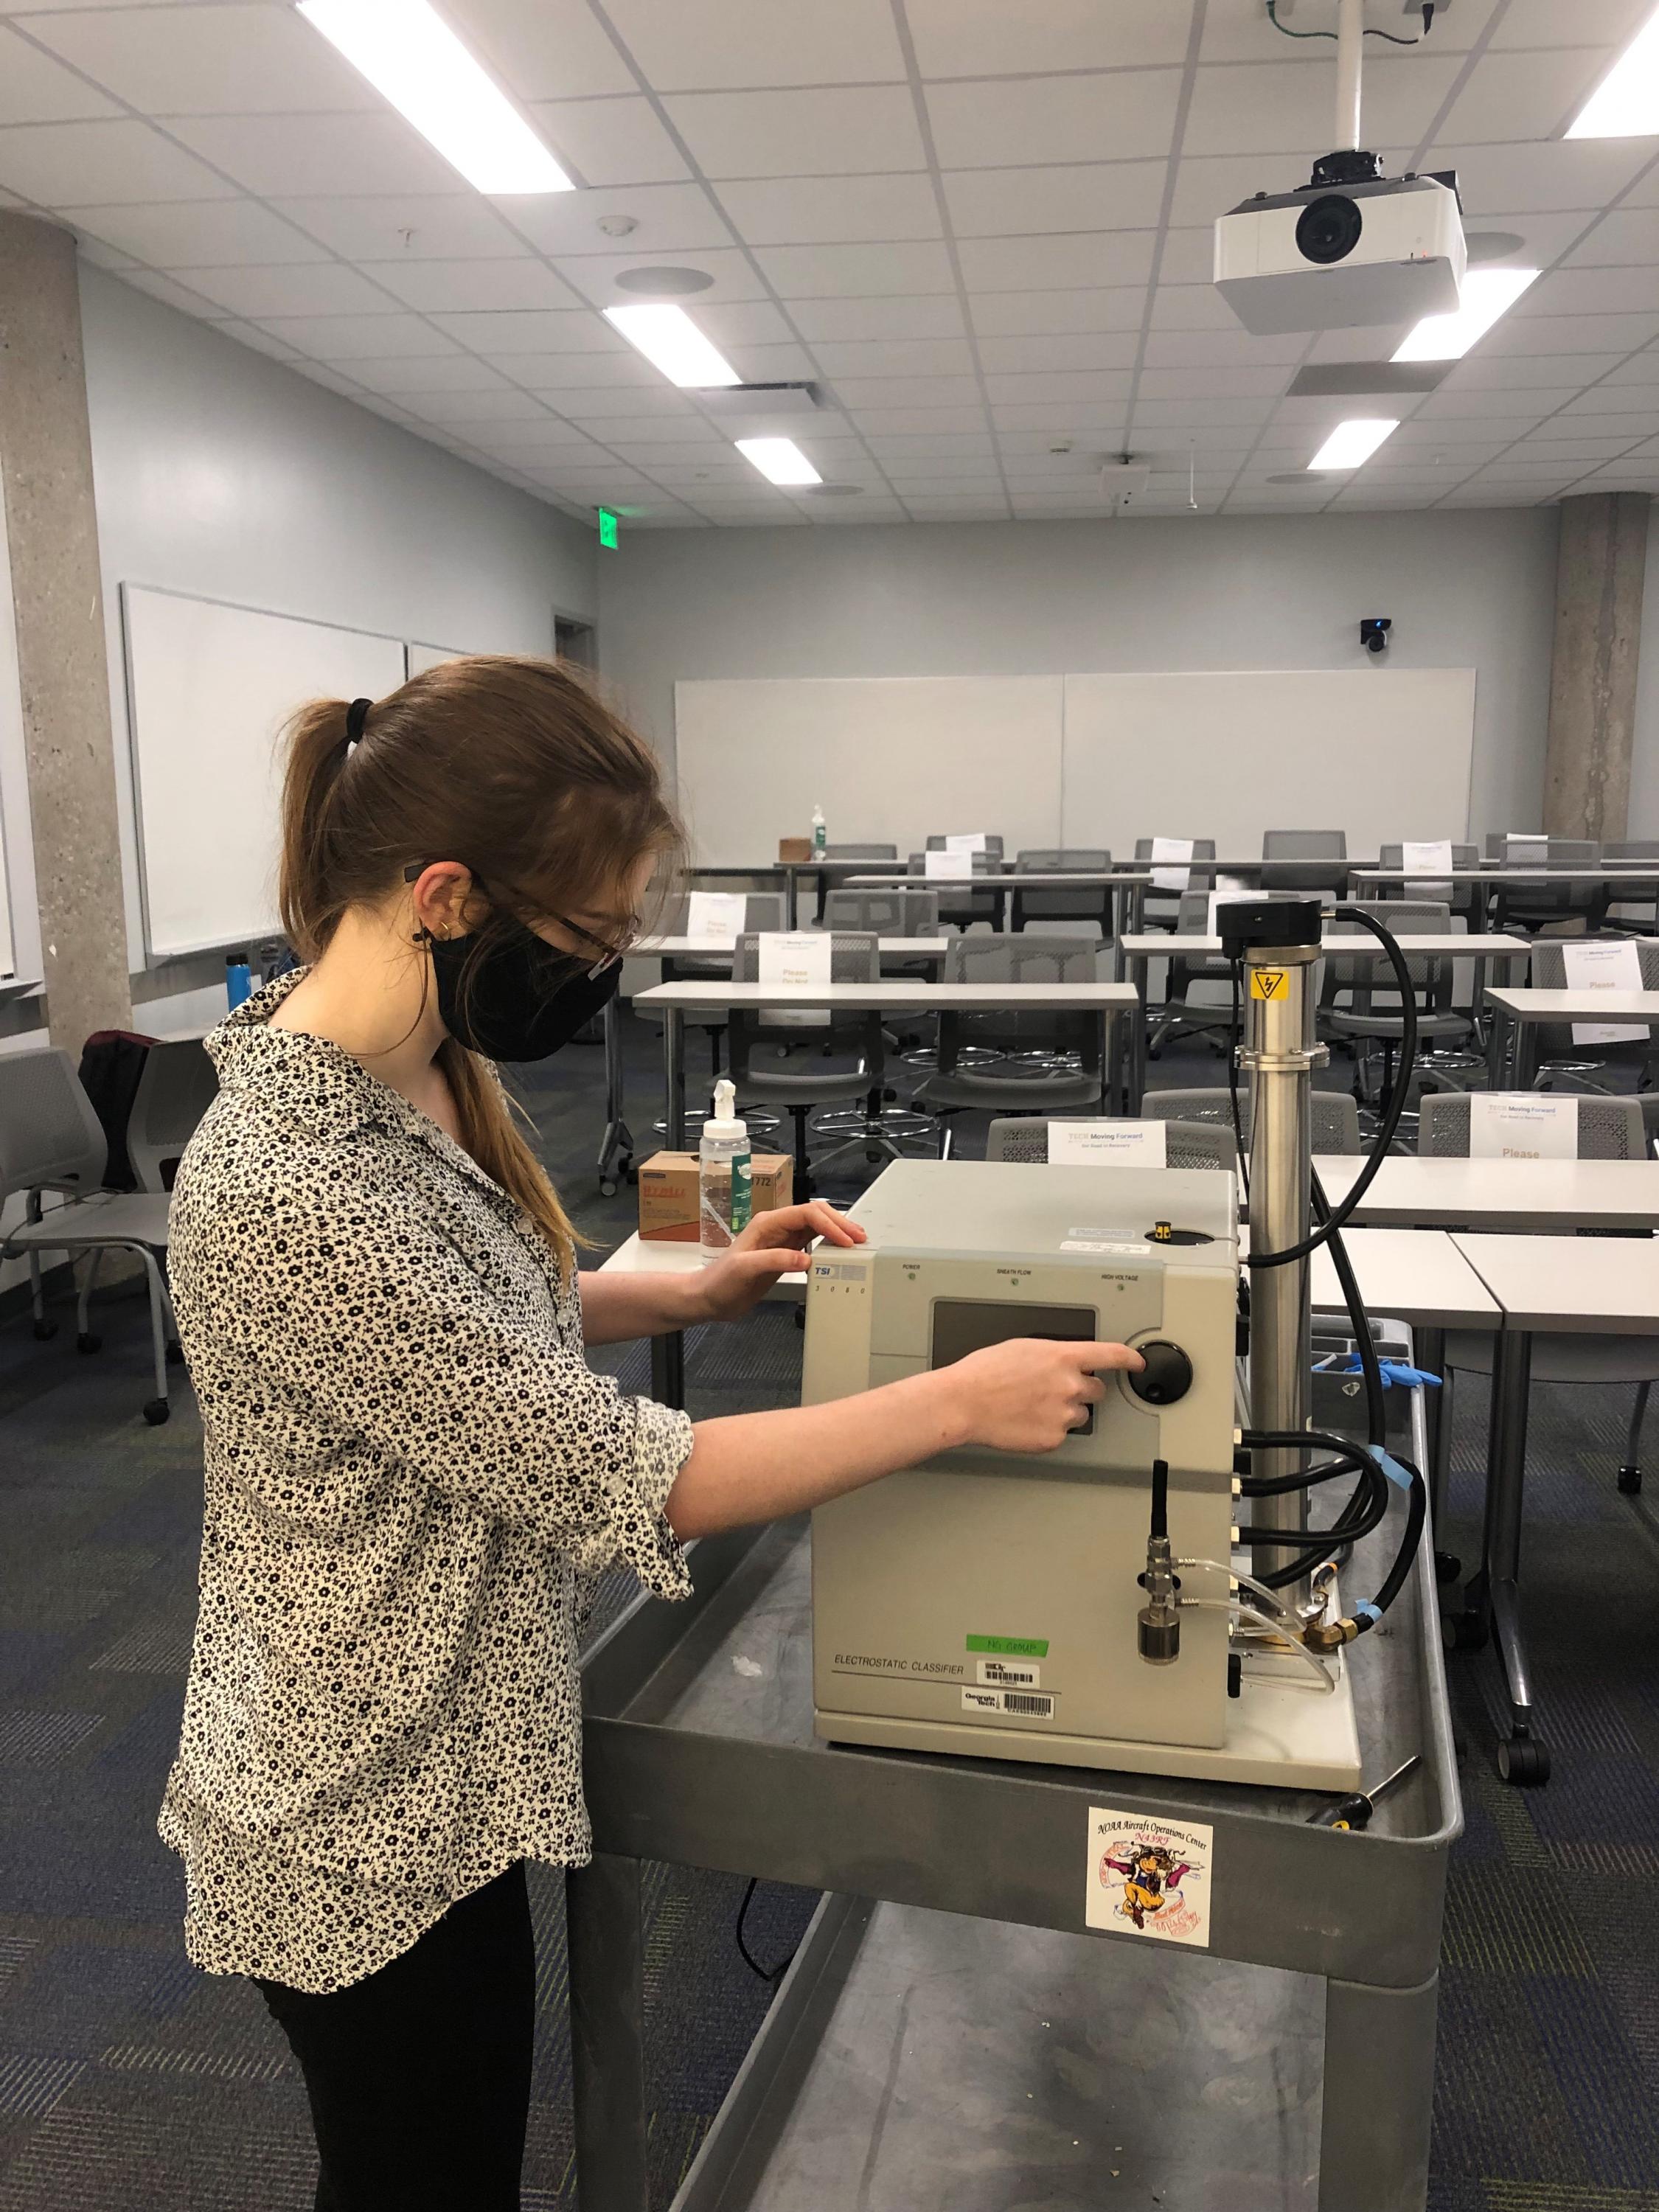 Graduate student Sabrina Westgate measures particle concentration in a classroom.